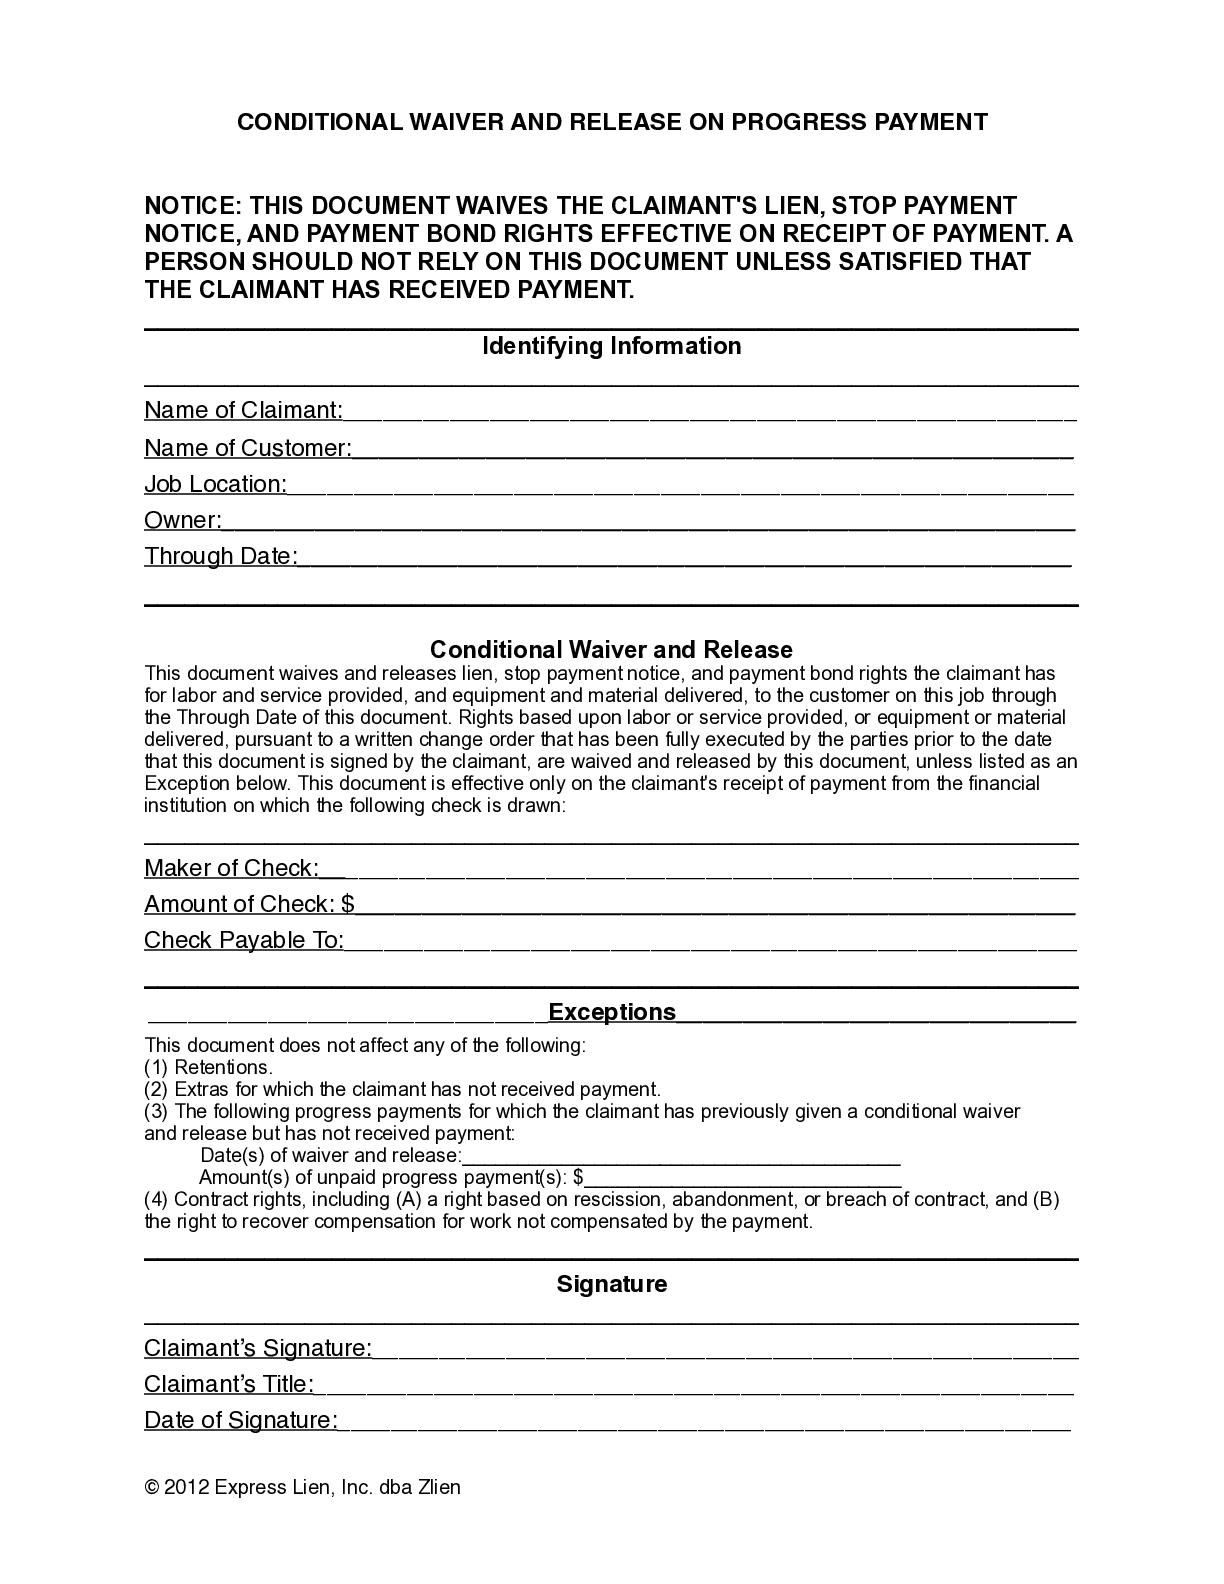 Iowa Partial Conditional Lien Waiver Form - free from